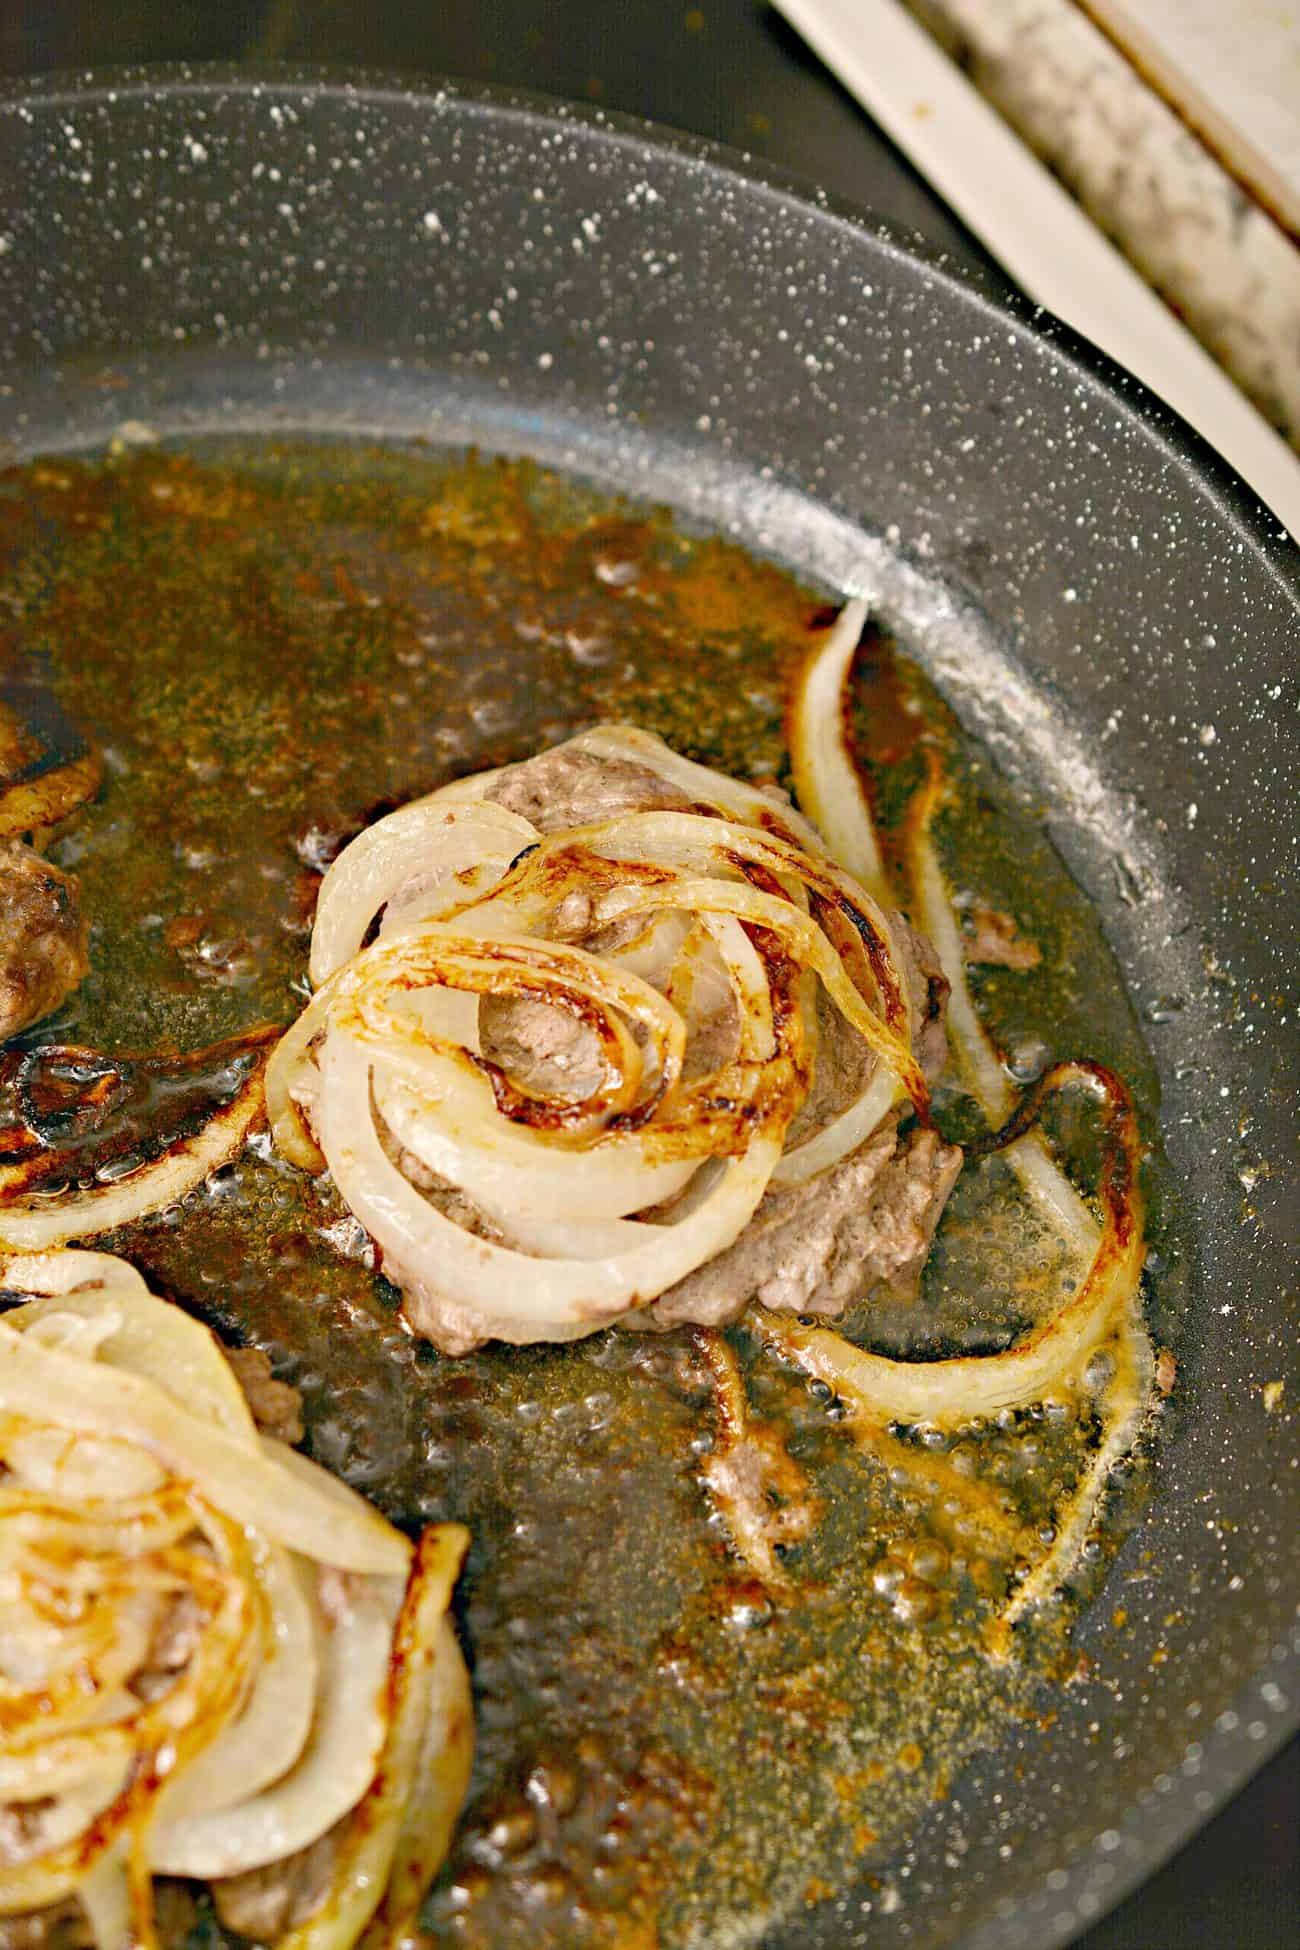 Continue to saute the meat onion side down until the onions have browned, about 6 minutes, then flip and continue to cook the burgers to your liking.